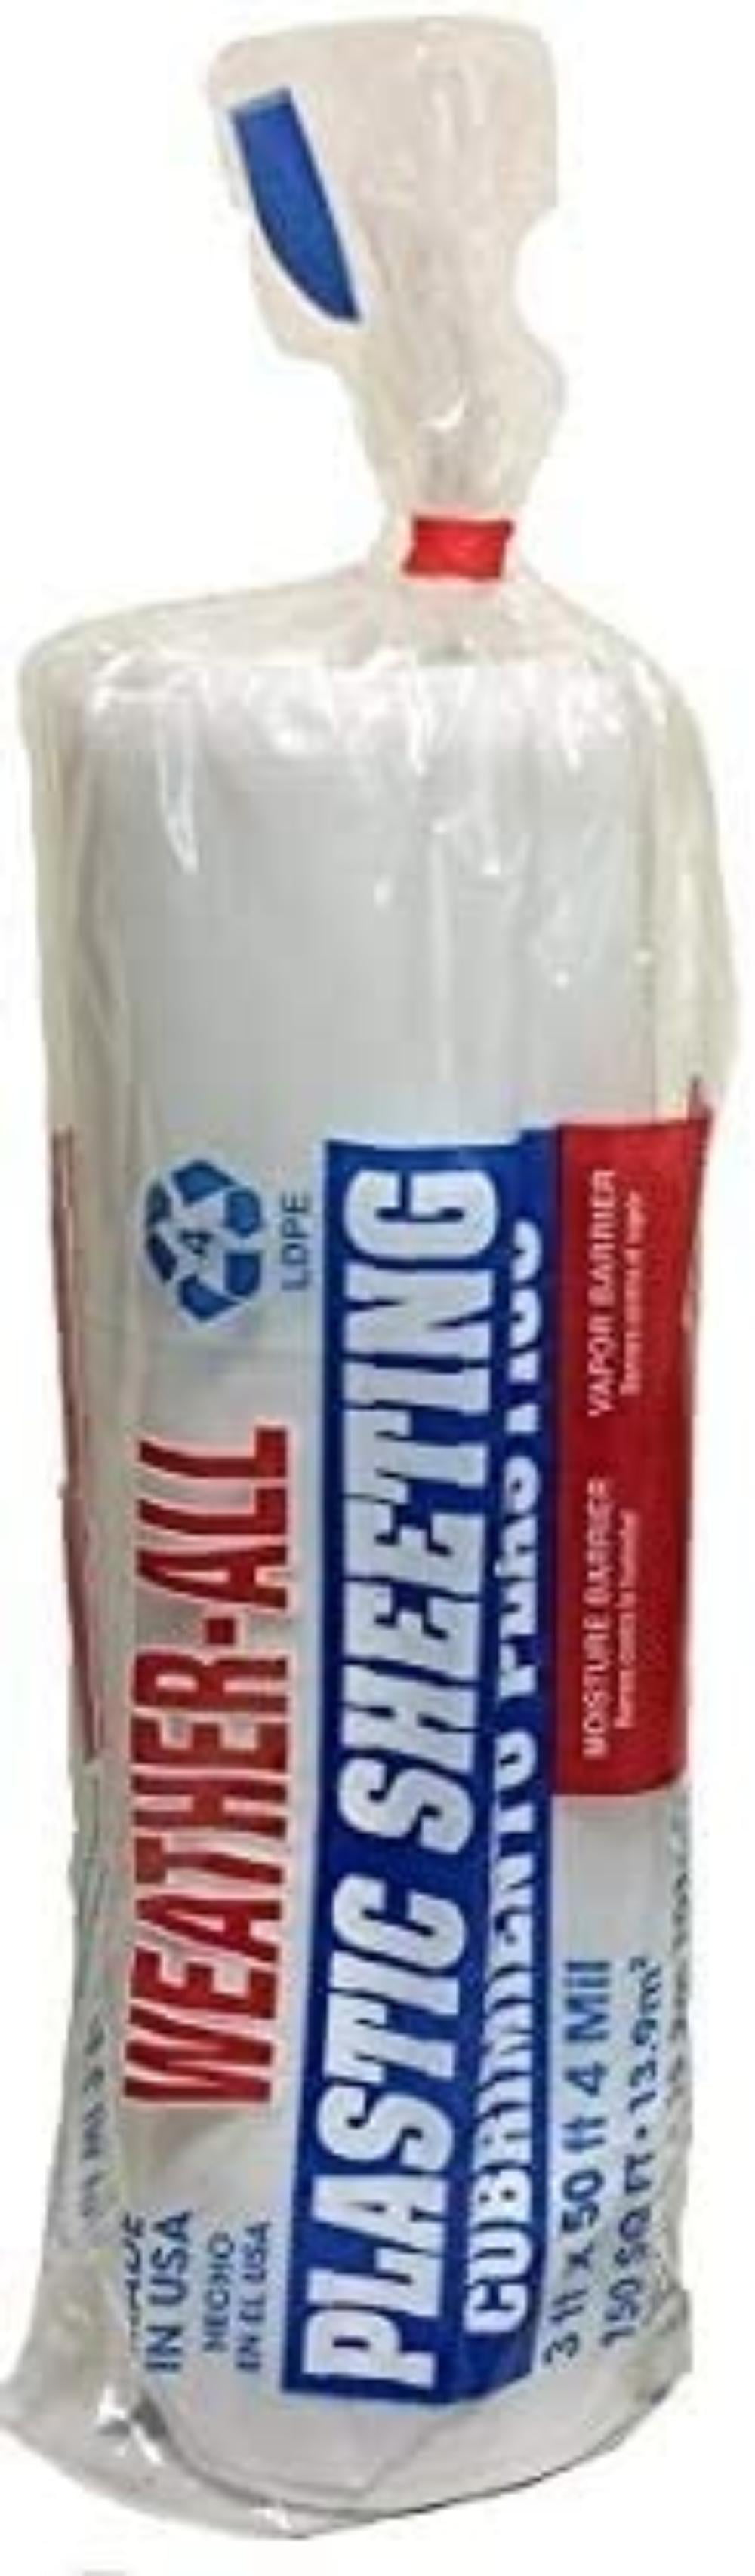 TRM Manufacturing 40350C Weatherall Visqueen Plastic Sheeting Clear Drop Cloth 3 Wide x 50 Length x 4.0 mil Thickness